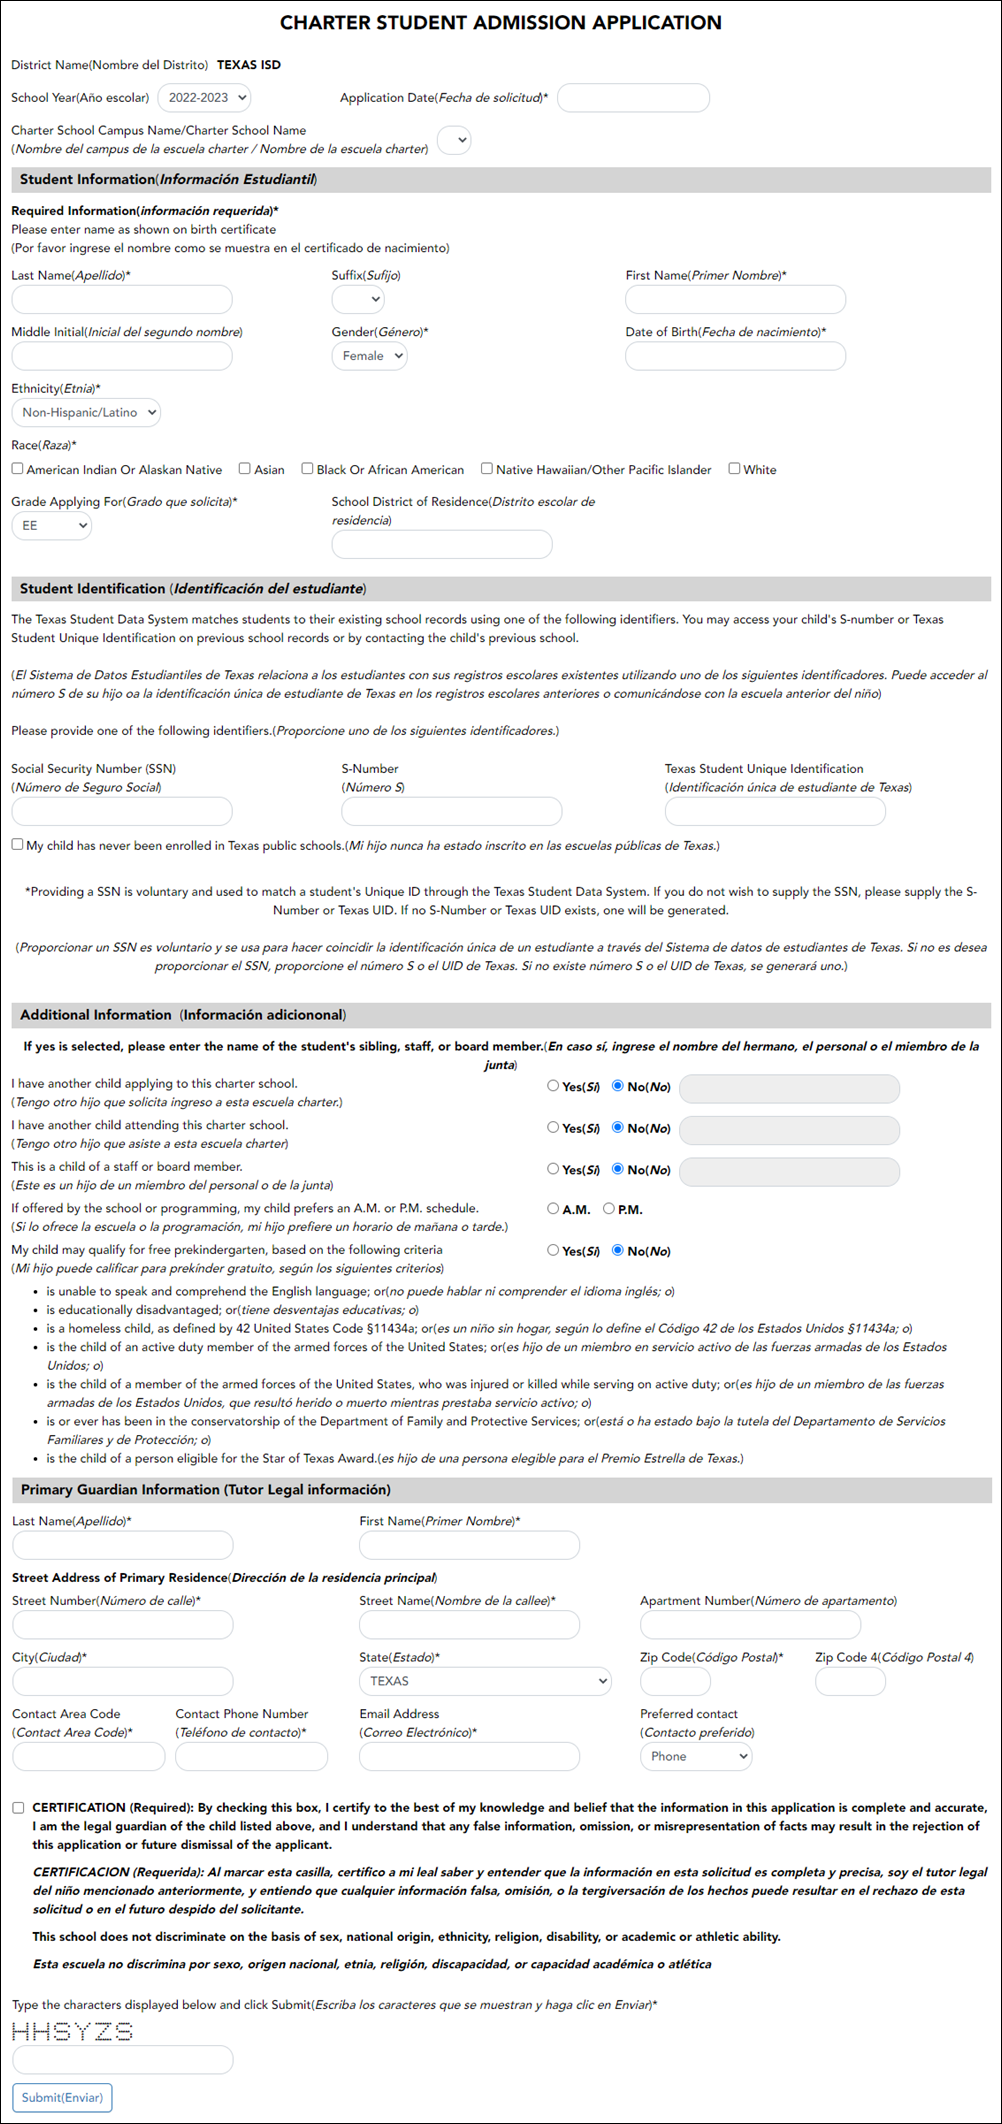 Charter School Admission Application